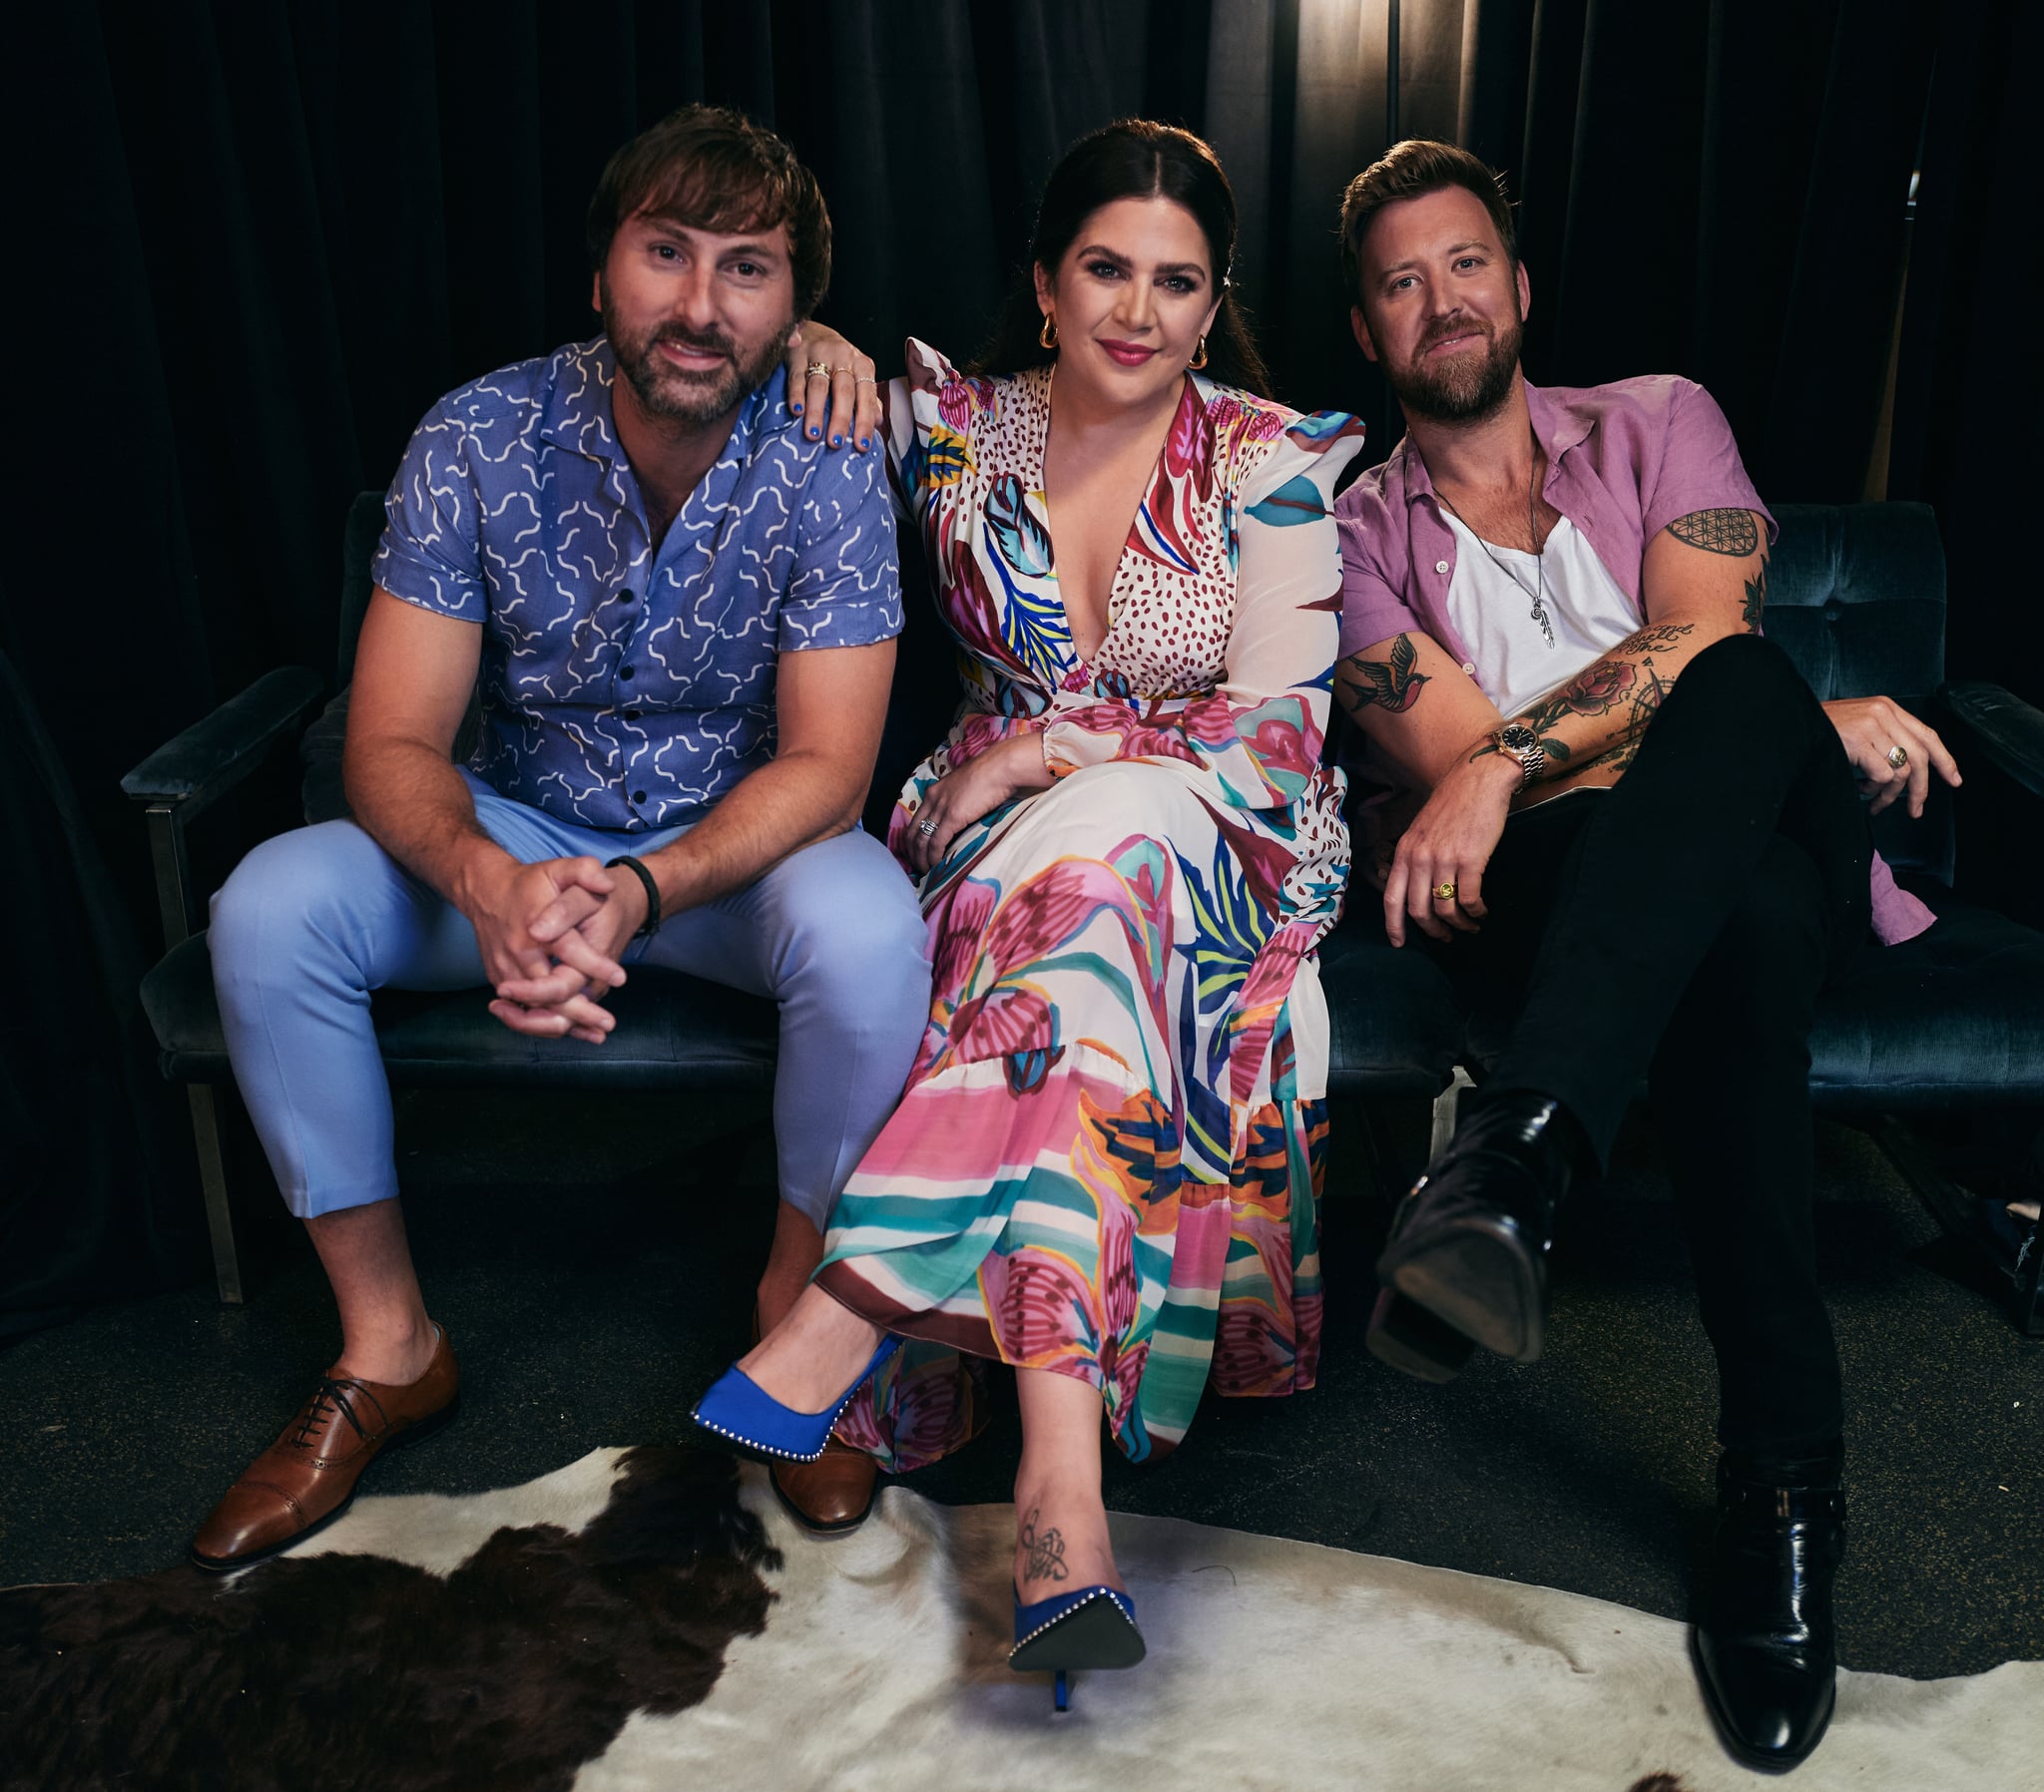 NASHVILLE, TENNESSEE - JUNE 12: (L-R) Dave Haywood, Hillary Scott and Charles Kelley of Lady A attend day 4 of The 49th CMA Fest at Nissan Stadium on June 12, 2022 in Nashville, Tennessee. (Photo by John Shearer/Getty Images for CMA)